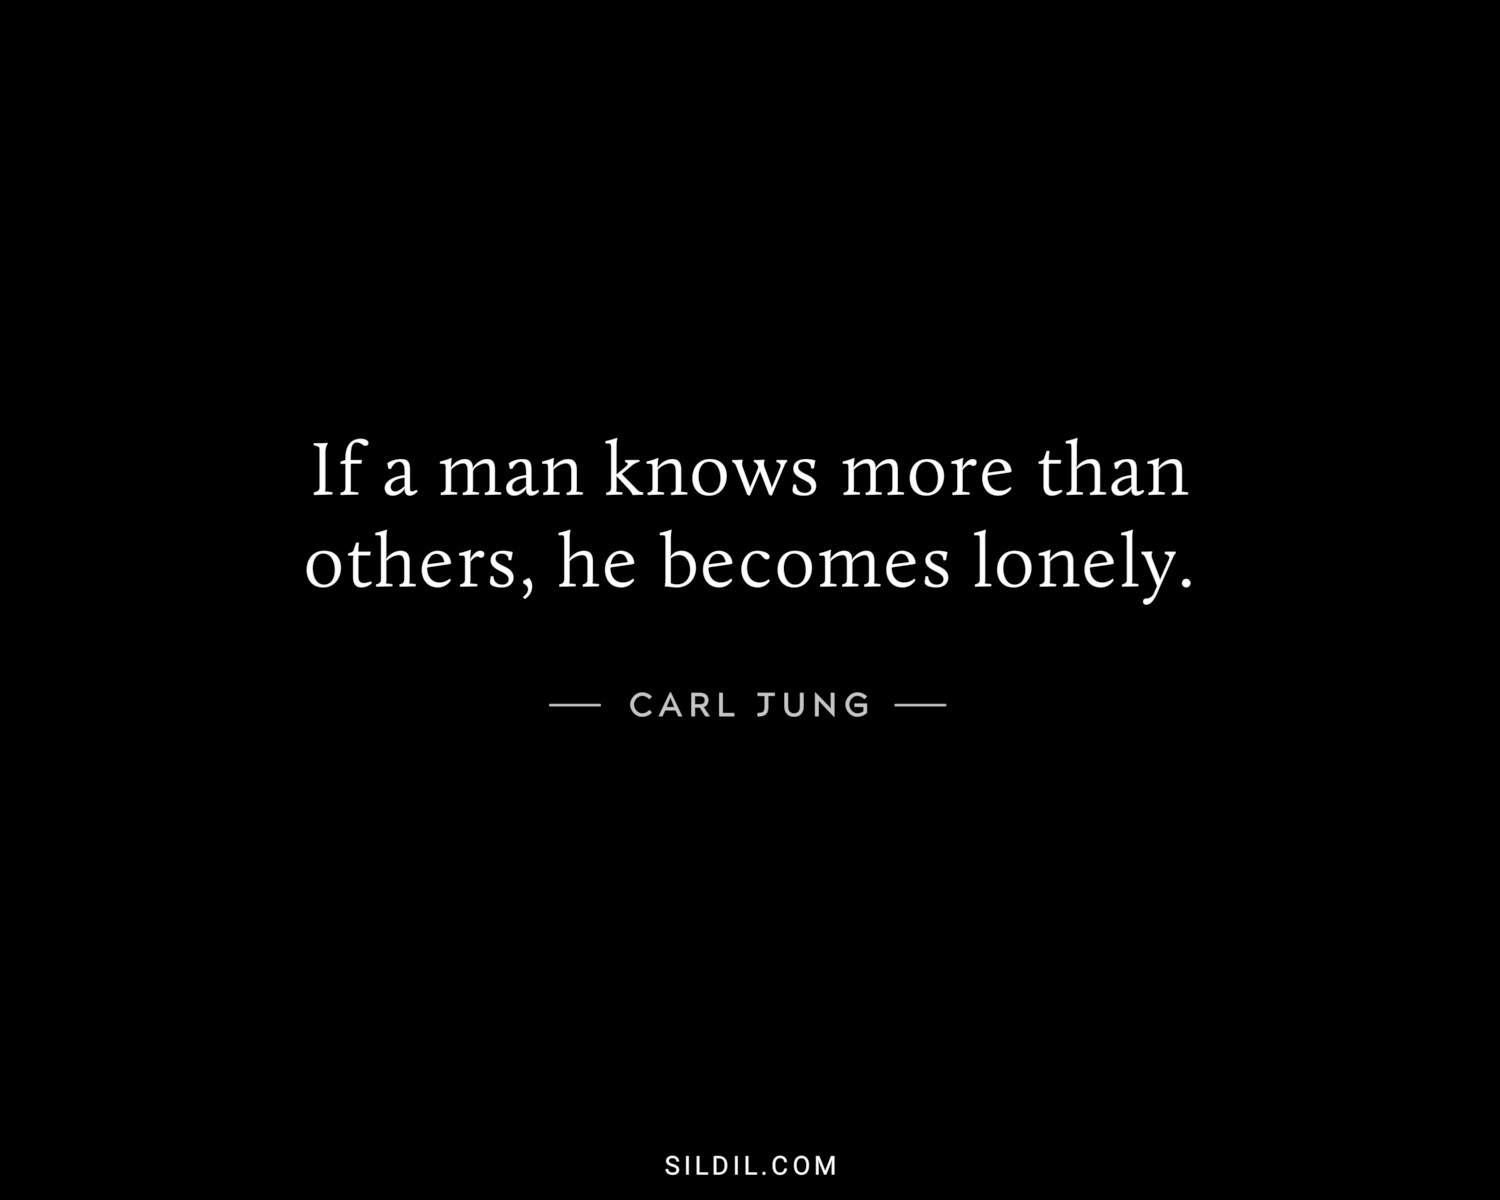 If a man knows more than others, he becomes lonely.